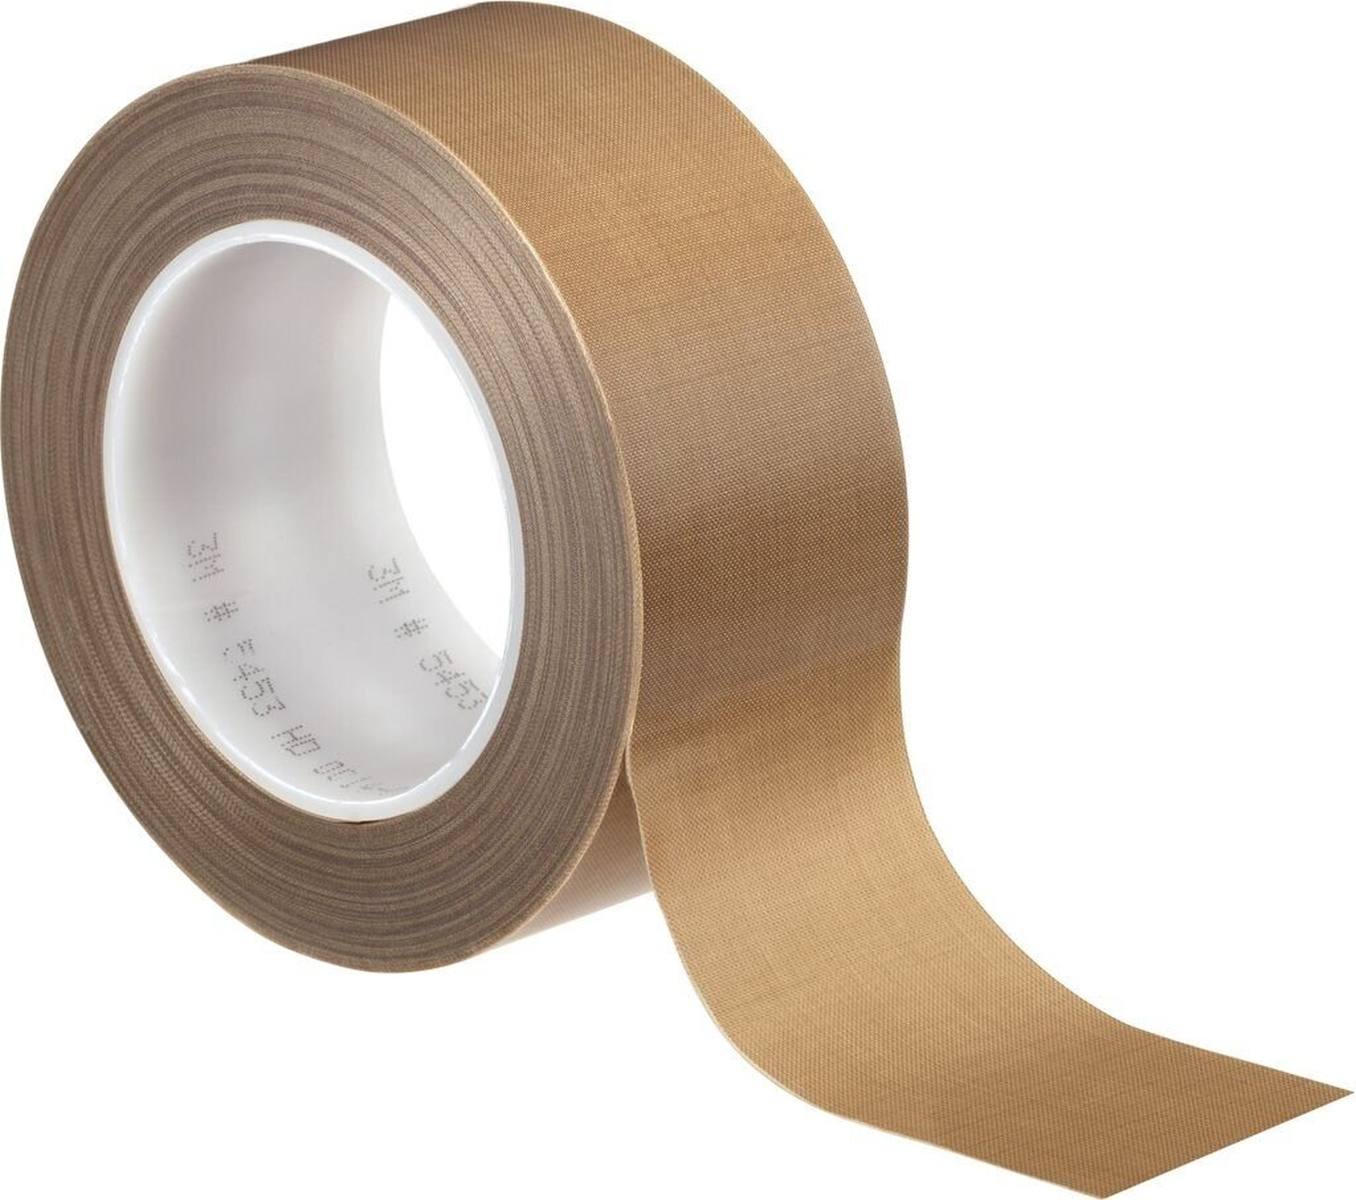 3M 5453 PTFE glass adhesive tape 15mmx33m, 0.22mm, silicone